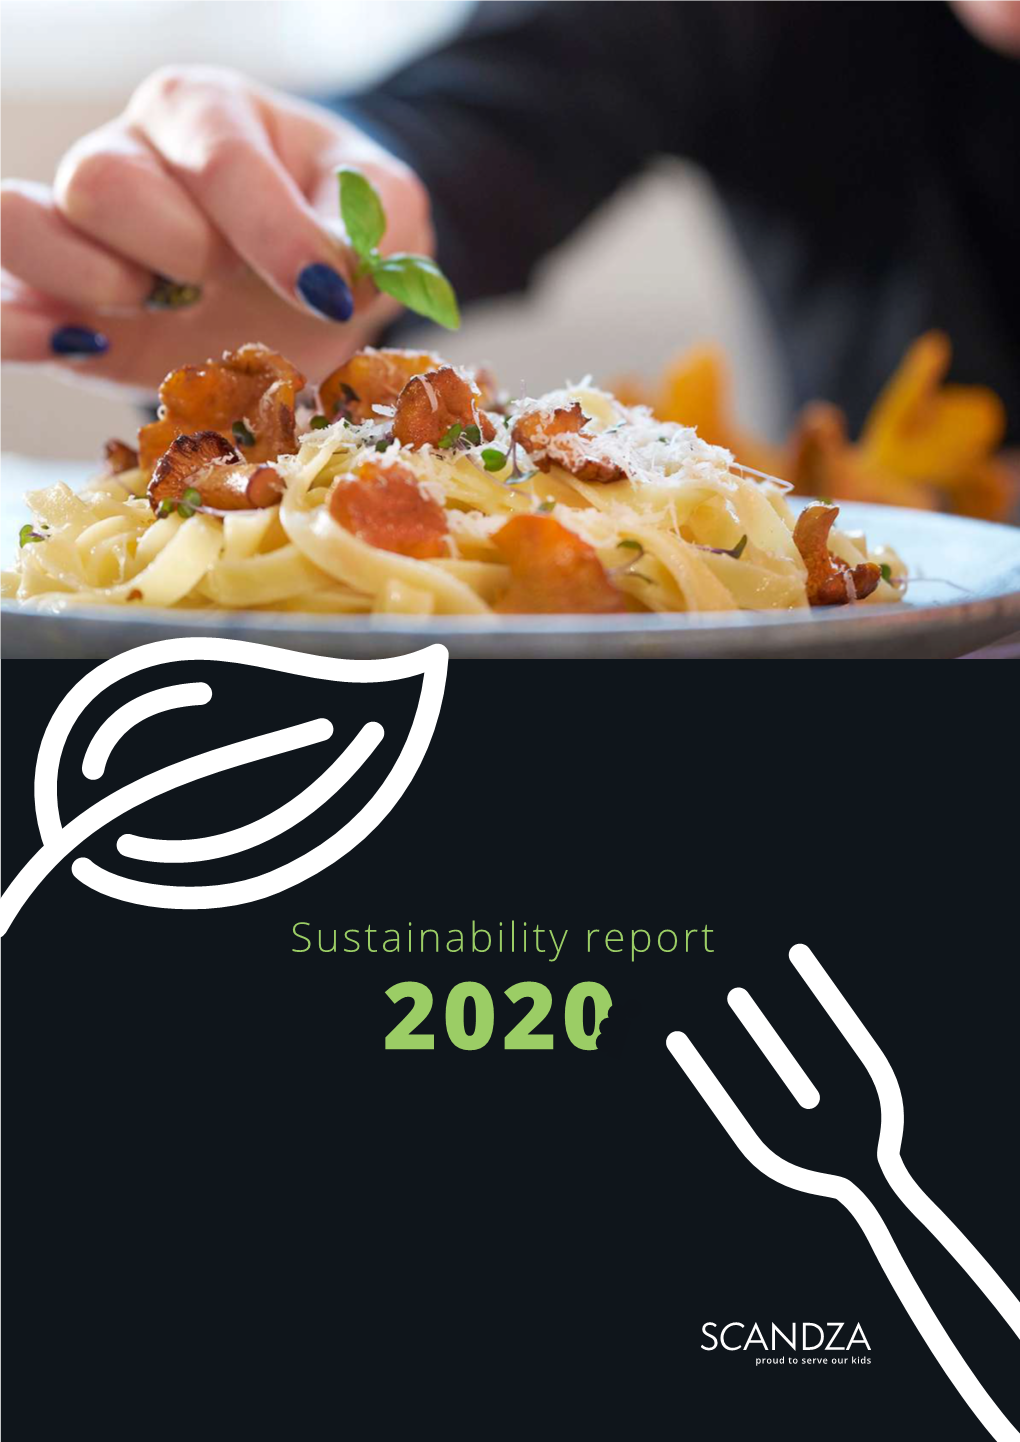 Sustainability Report 2020 02 Content